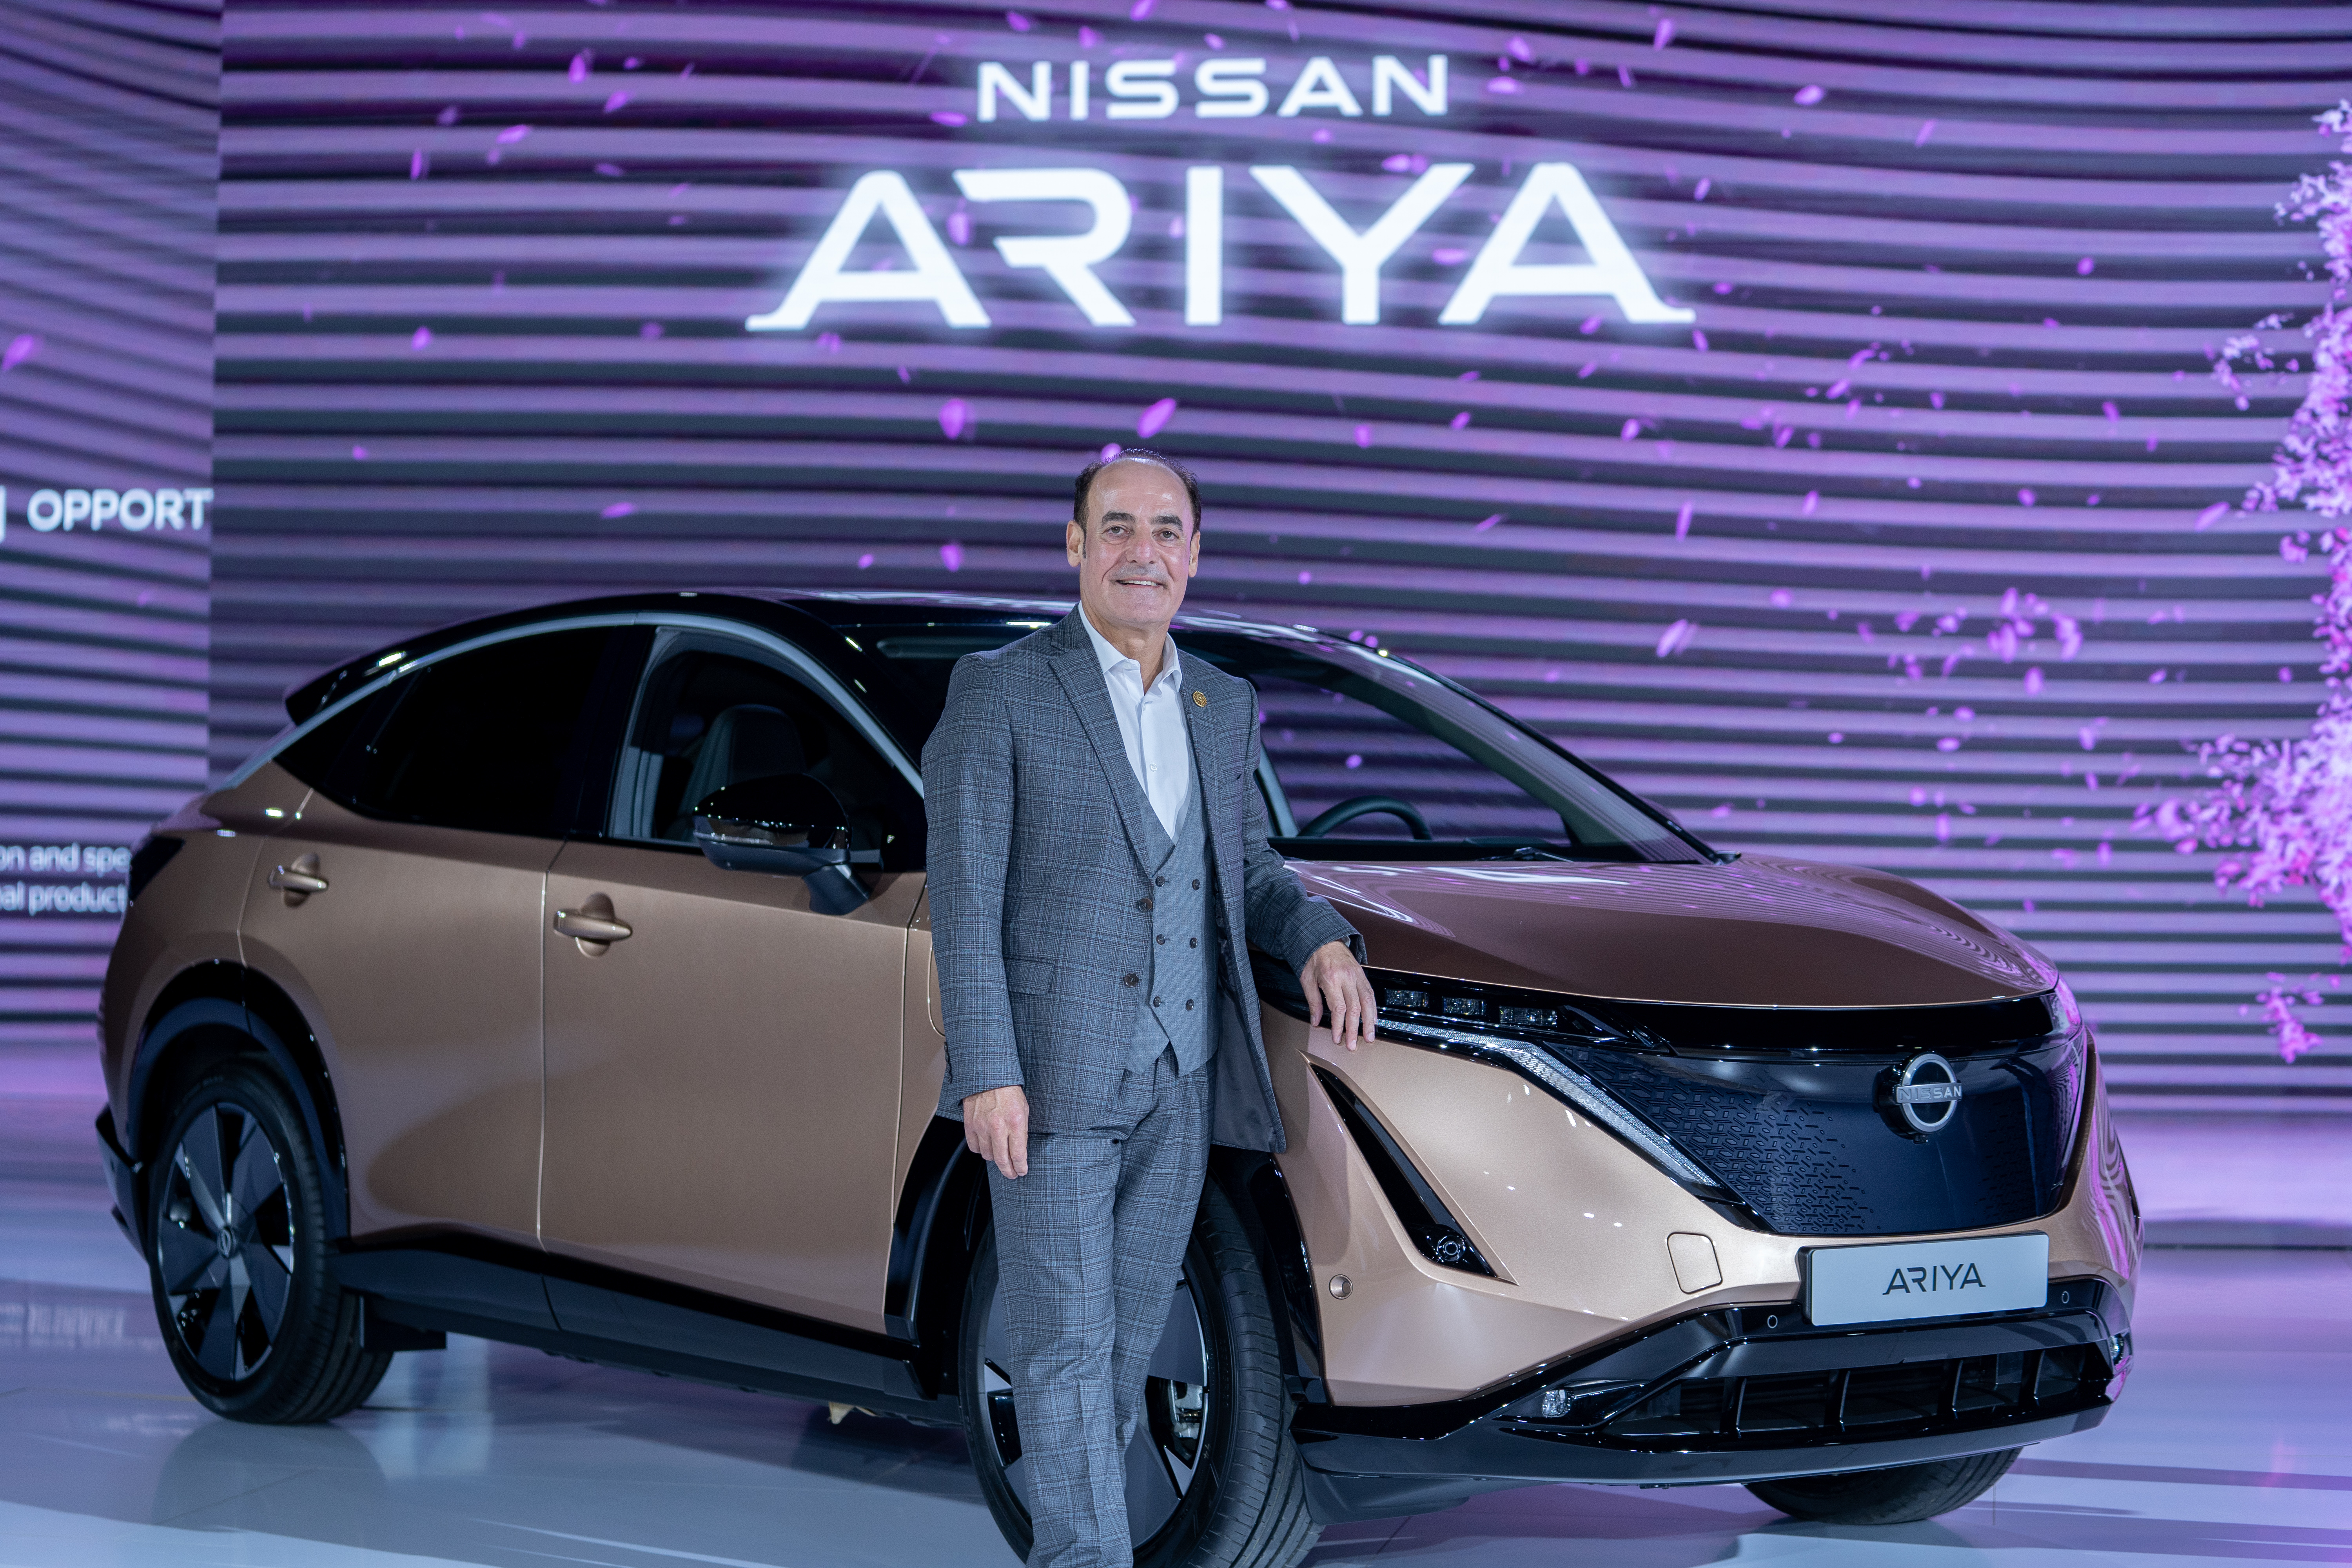 Statement by Irfan Tansel, CEO of Al Masaood Automobiles on Nissan’s New Electrified Line-Up